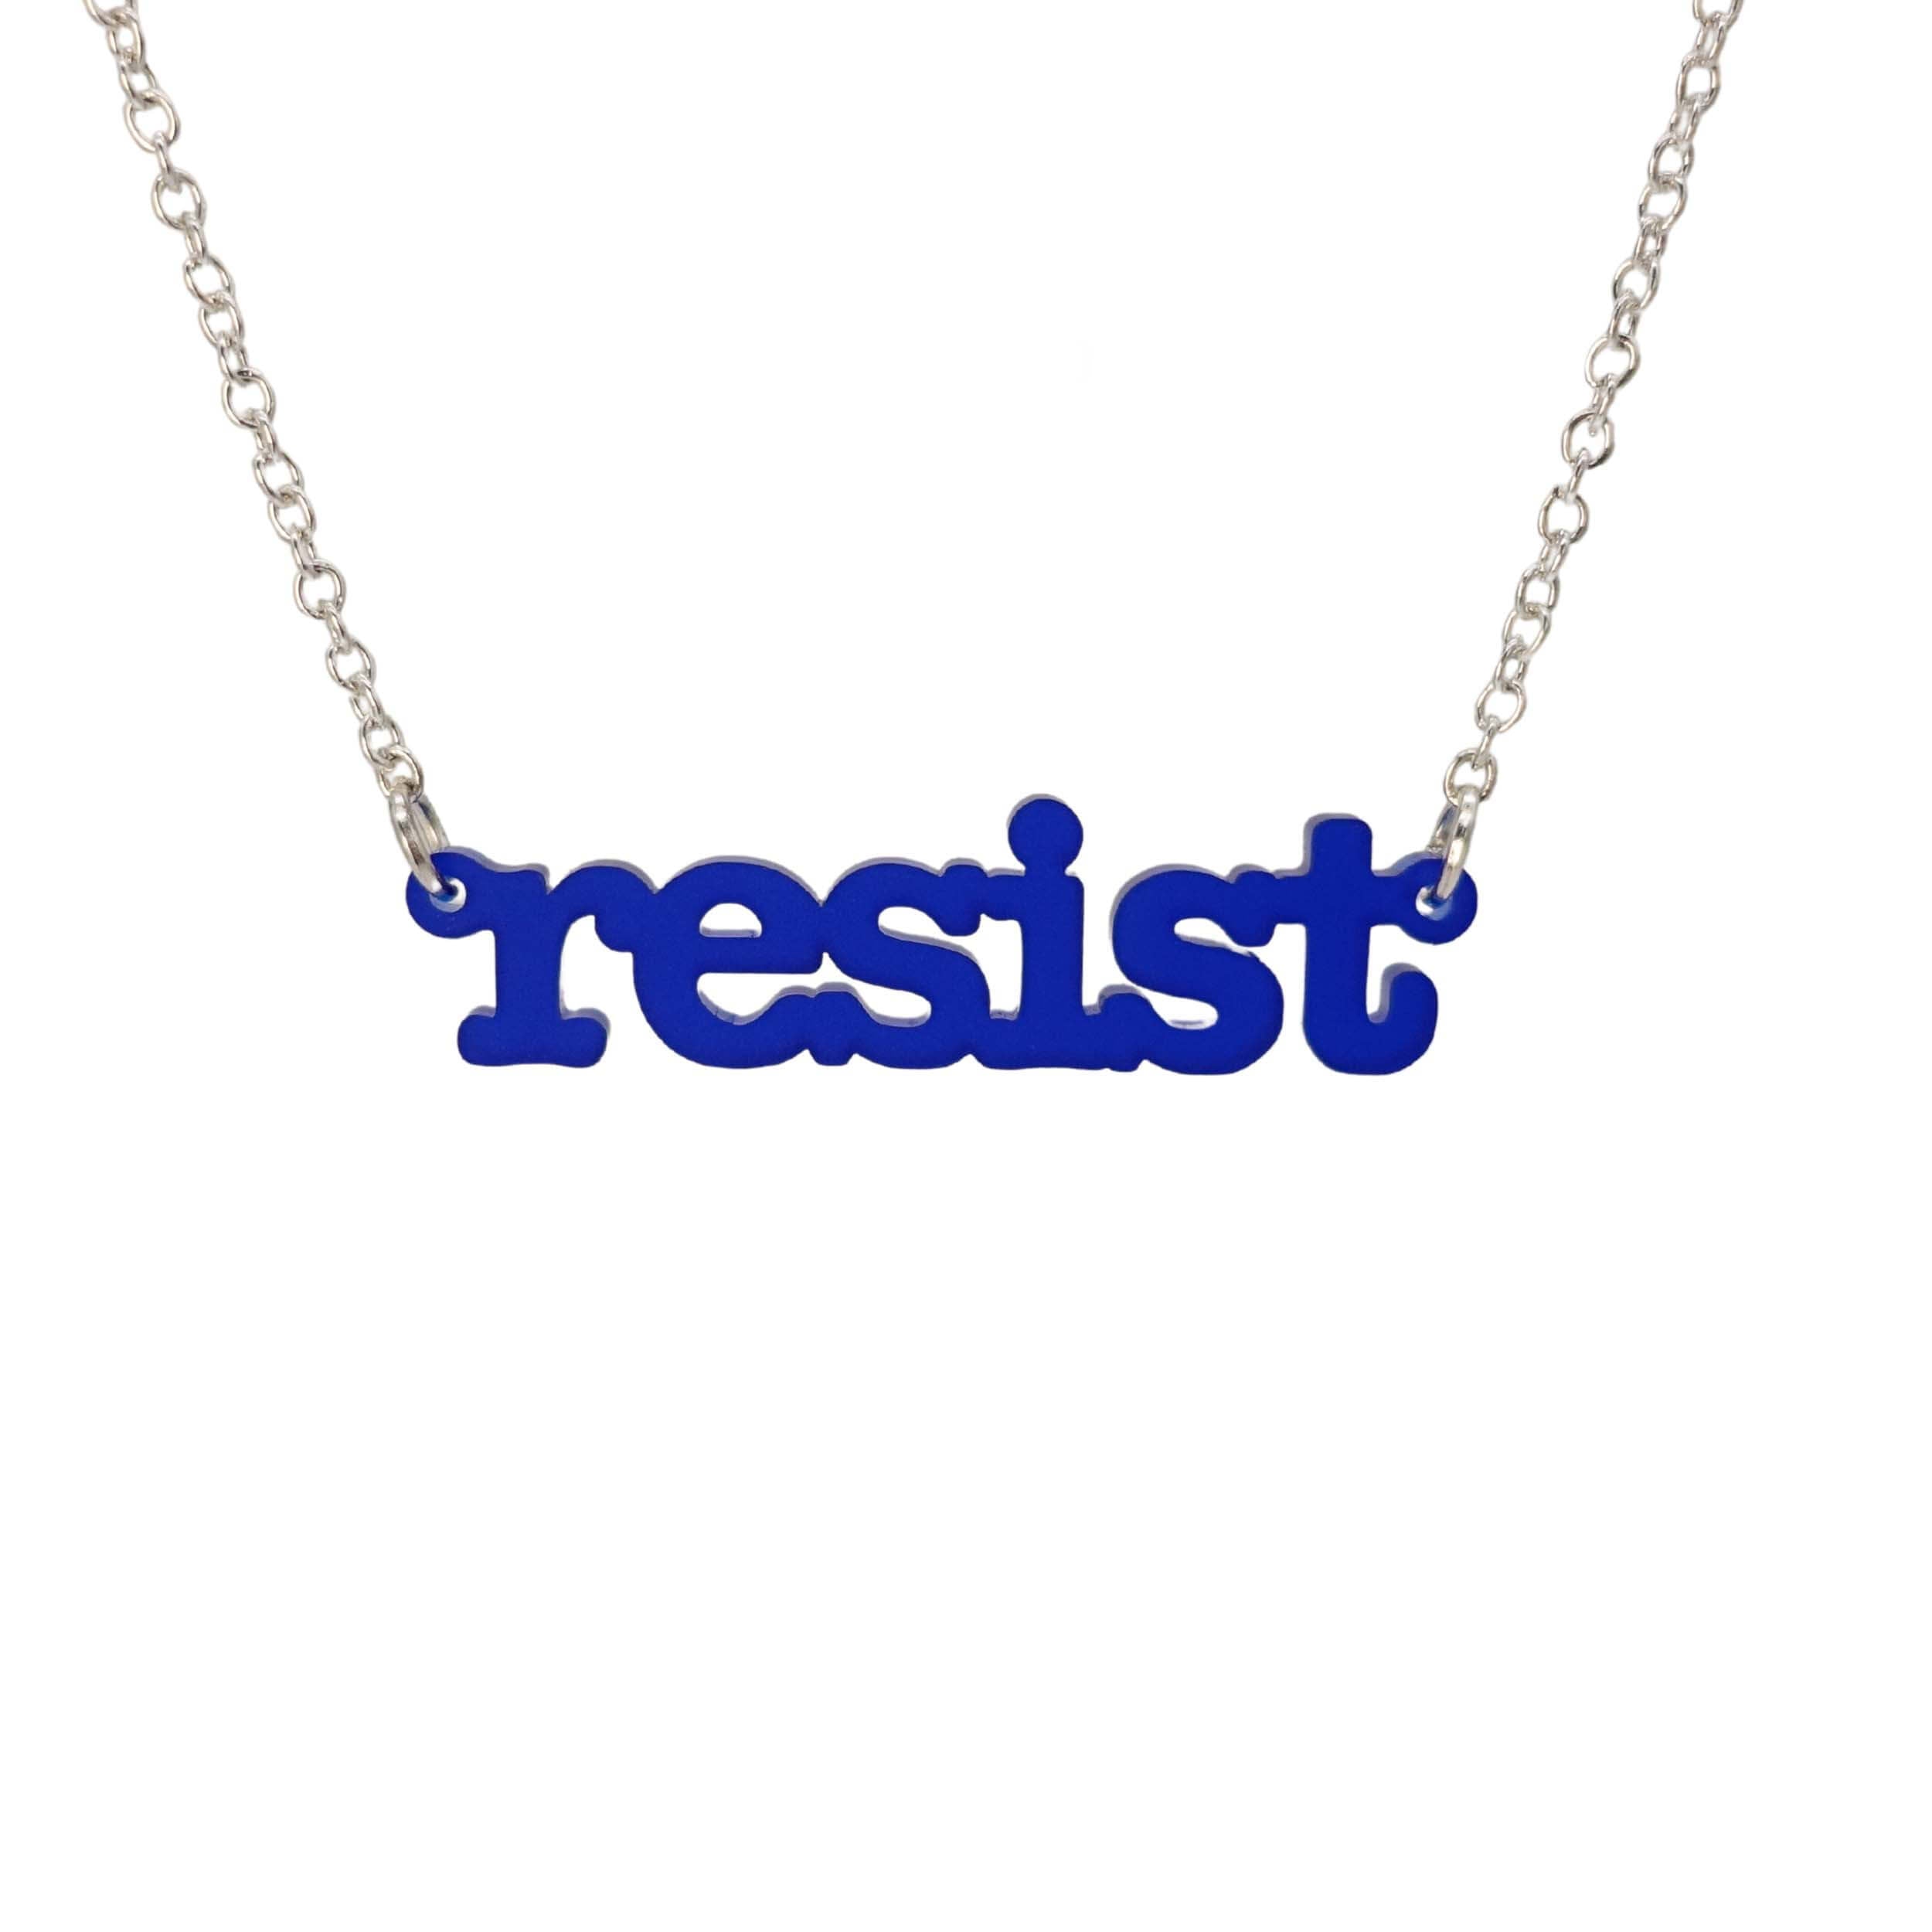 Indigo frost Resist necklace in typewriter font hanging on a silver chain against a white background. 